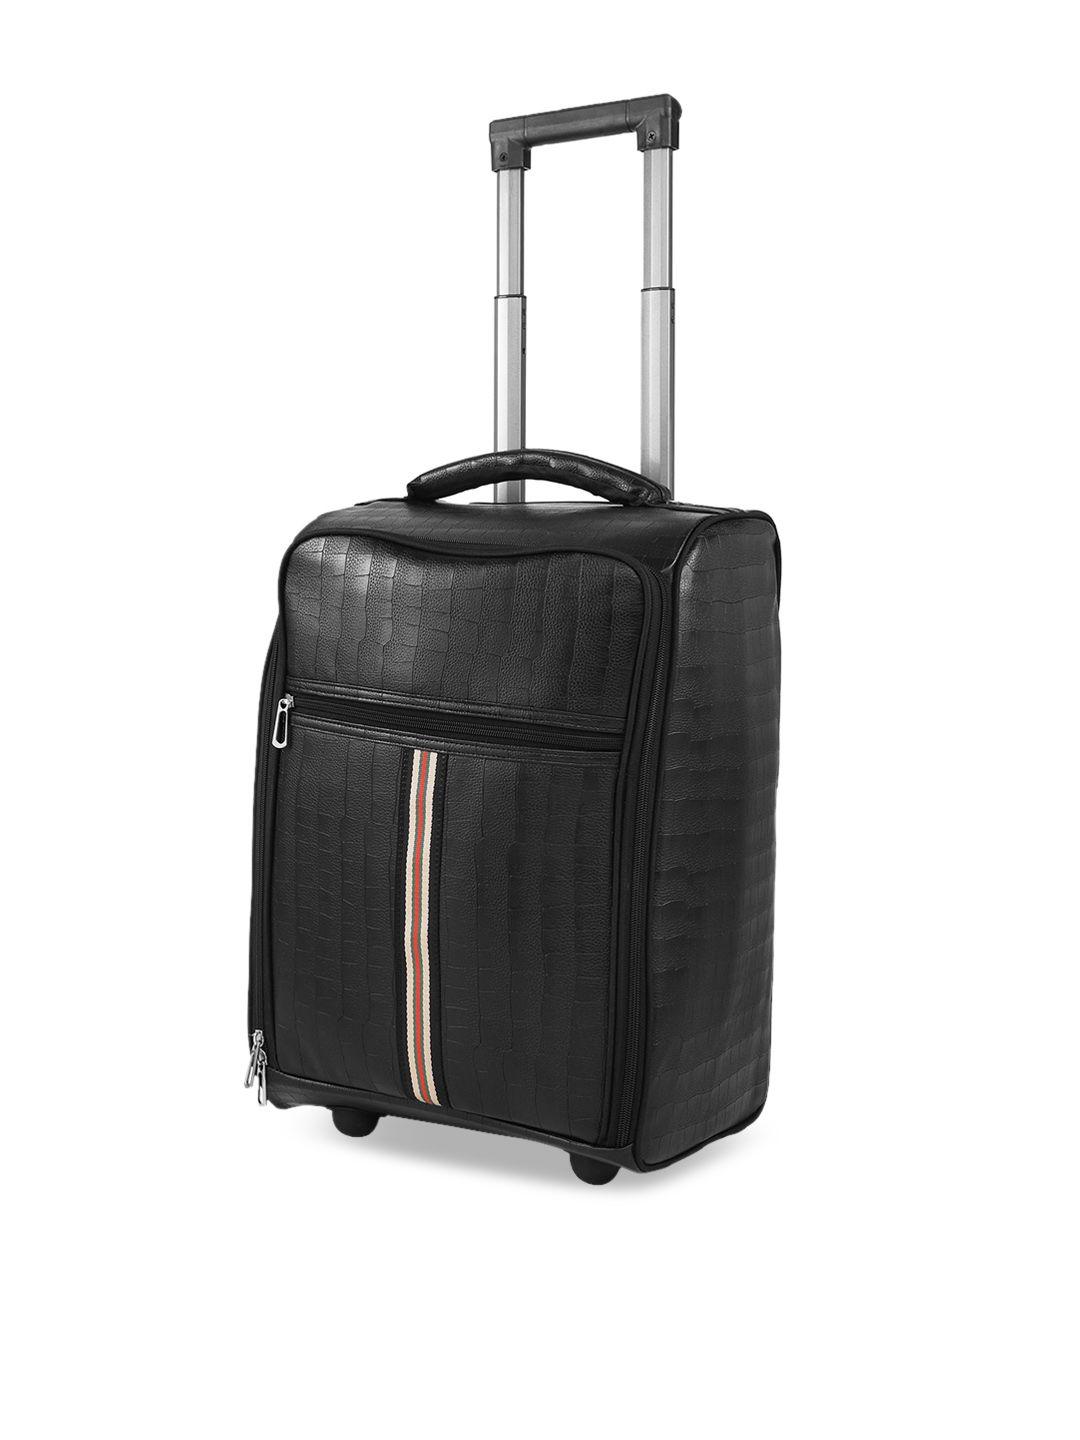 mboss black solid soft-sided cabin trolley suitcase